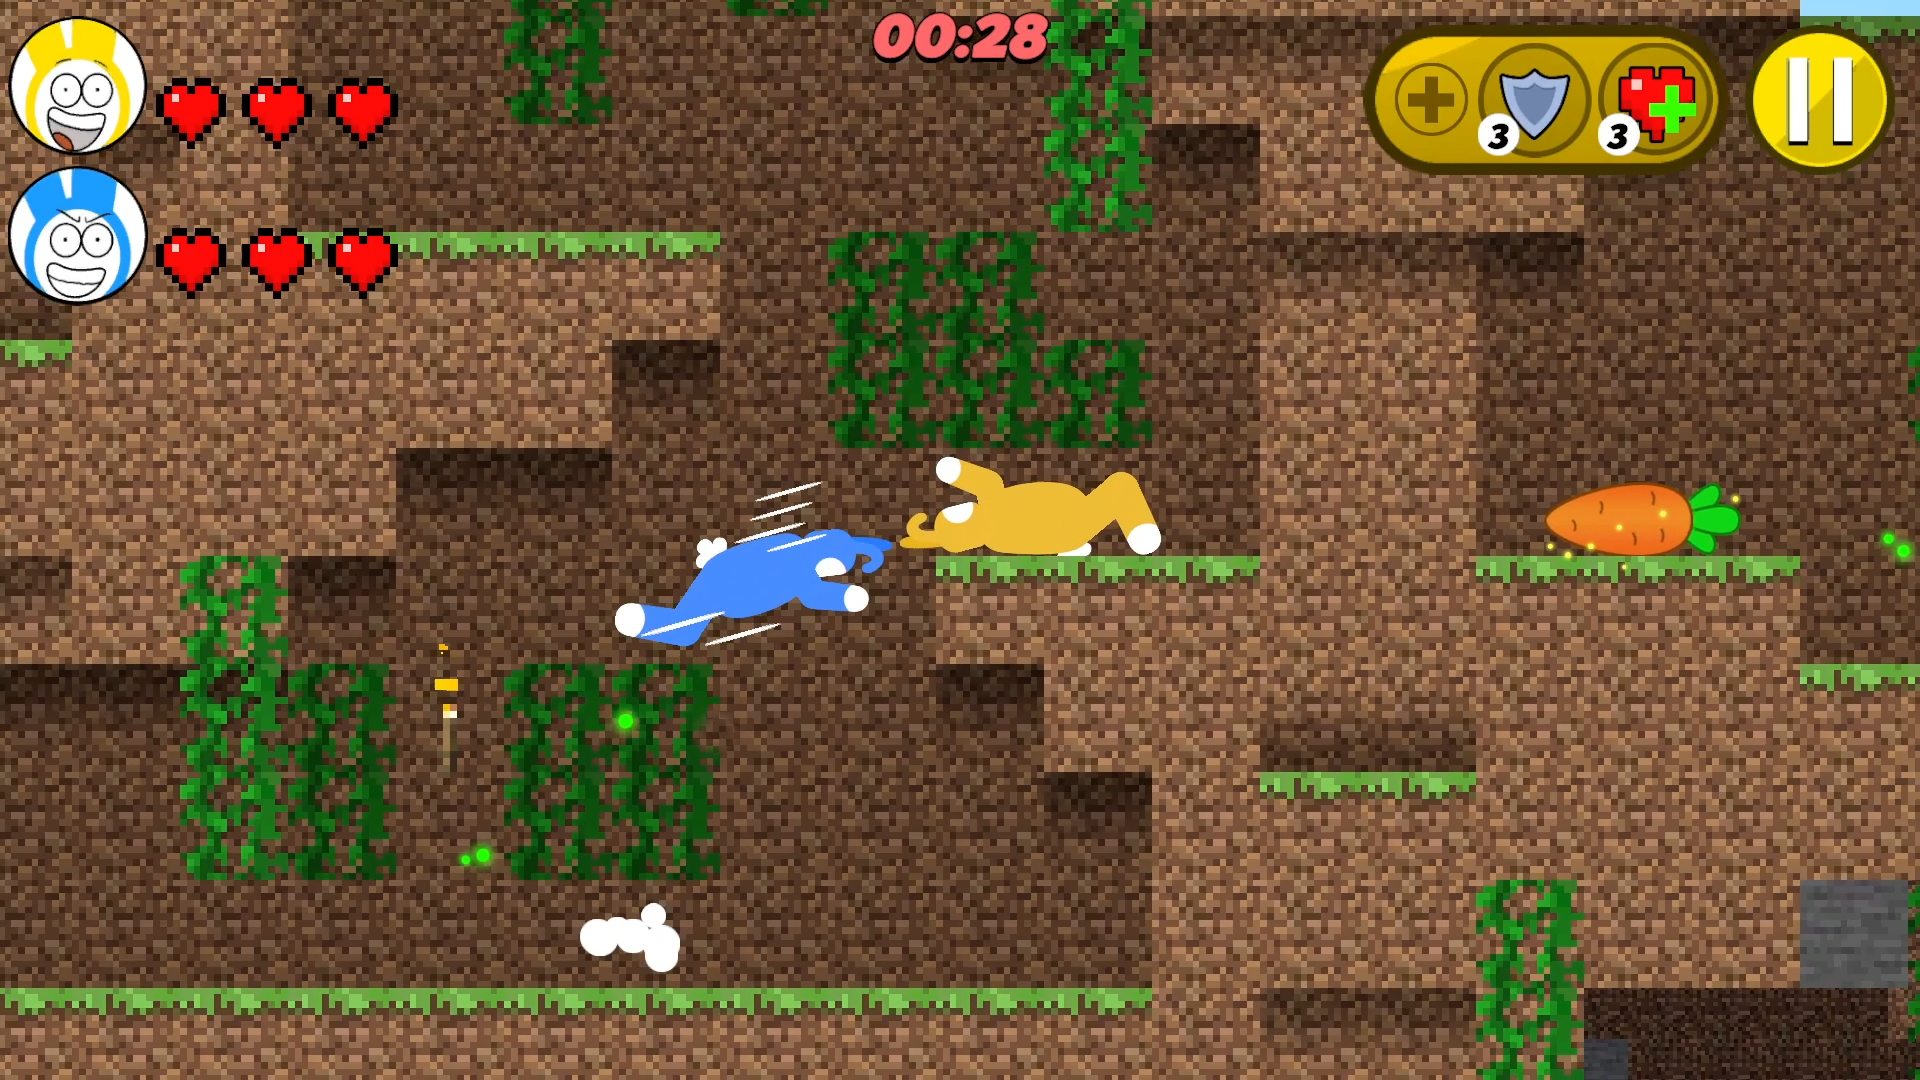 Crazy super bunnies — play online for free on Yandex Games